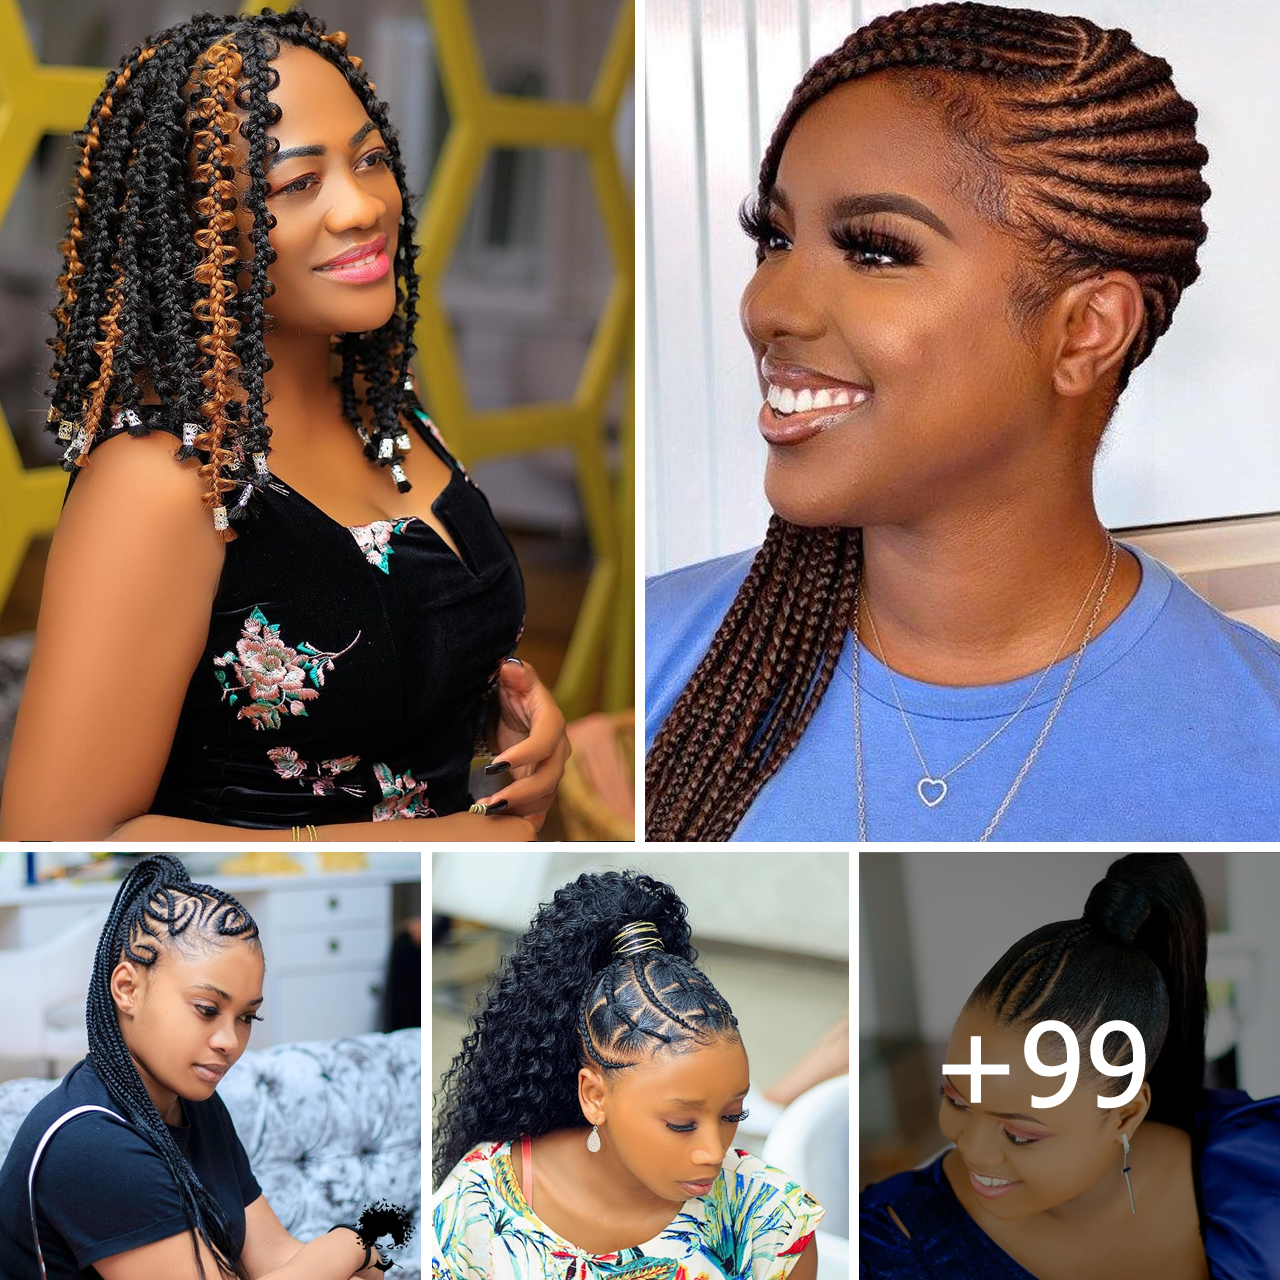 Embrace Your Royal Elegance: Discover Fabulous Braided Hairstyles to Reign Supreme!